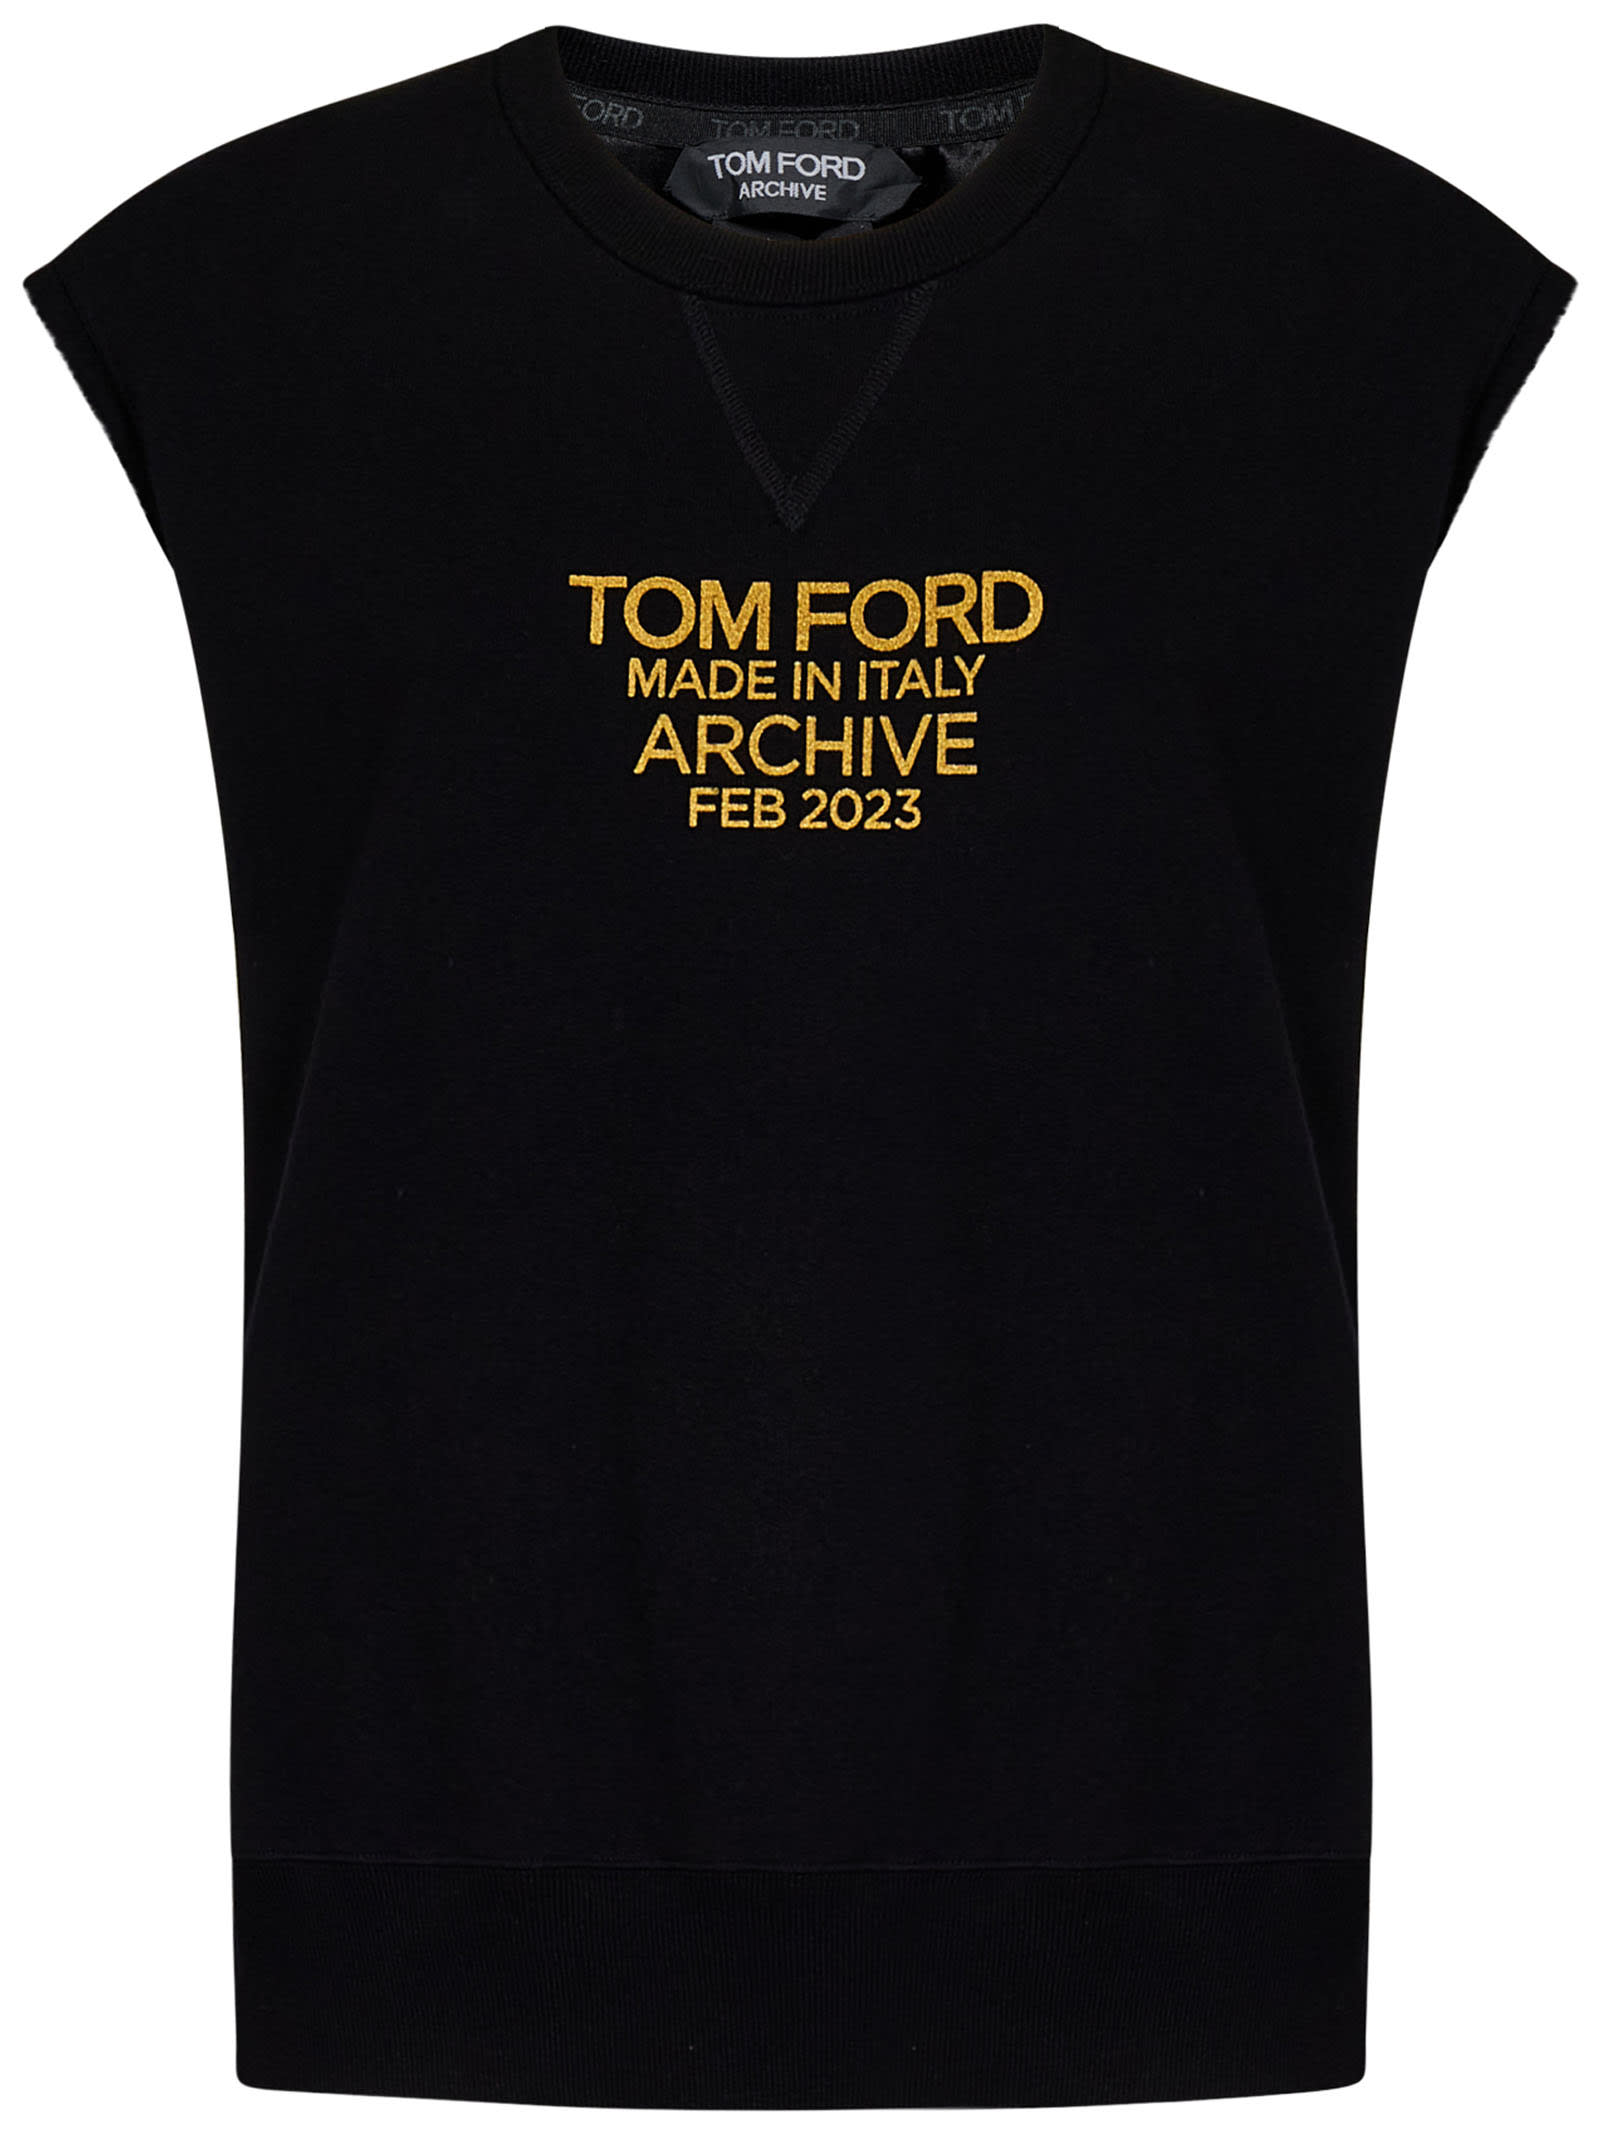 TOM FORD TOP